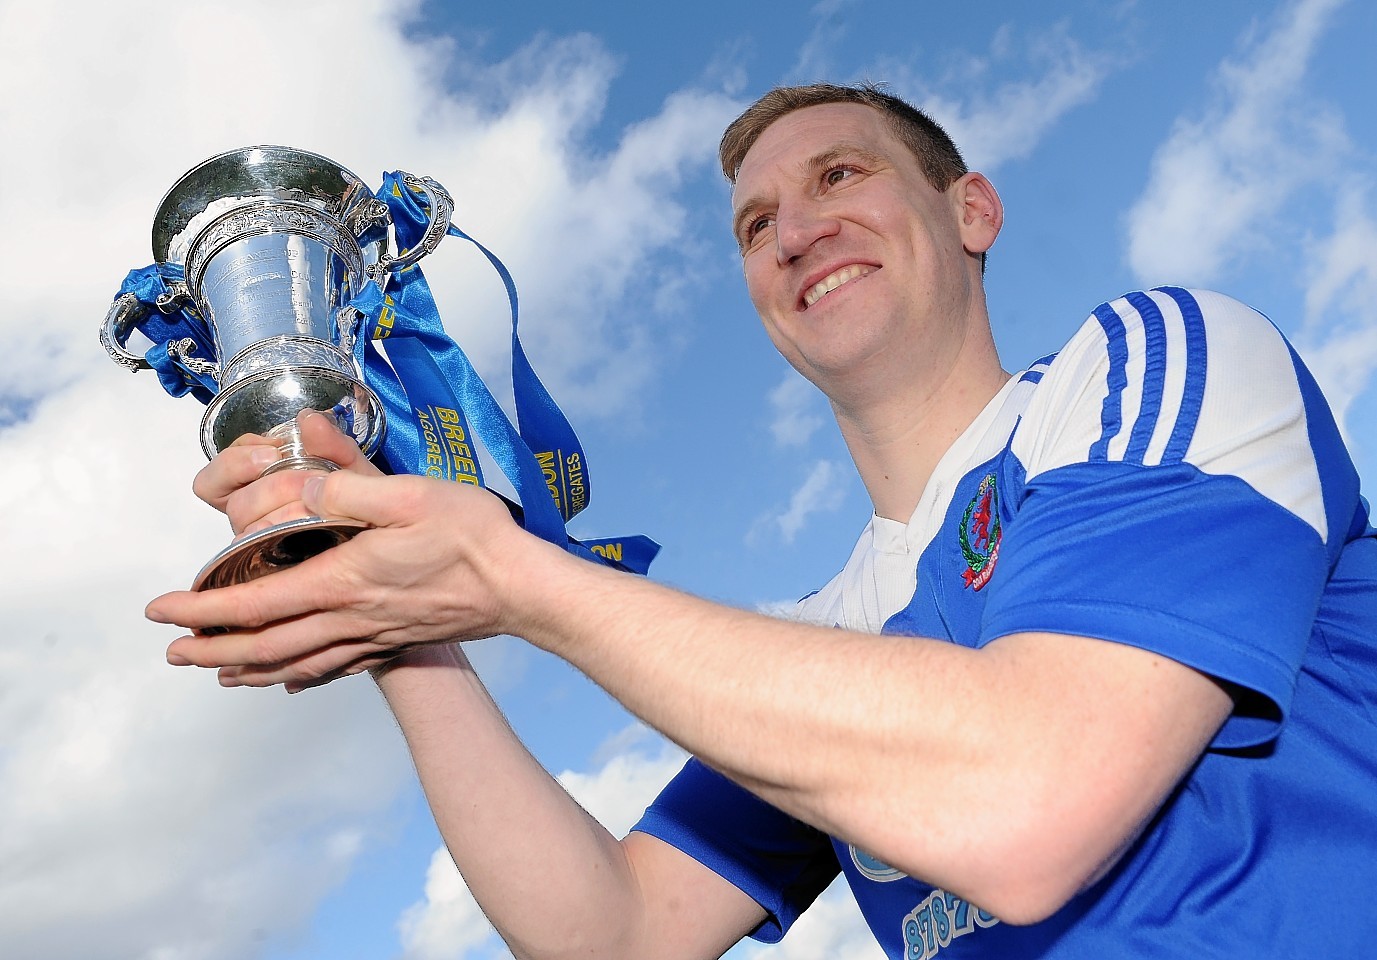 Cove Captain, Eric Watson with the trophy.